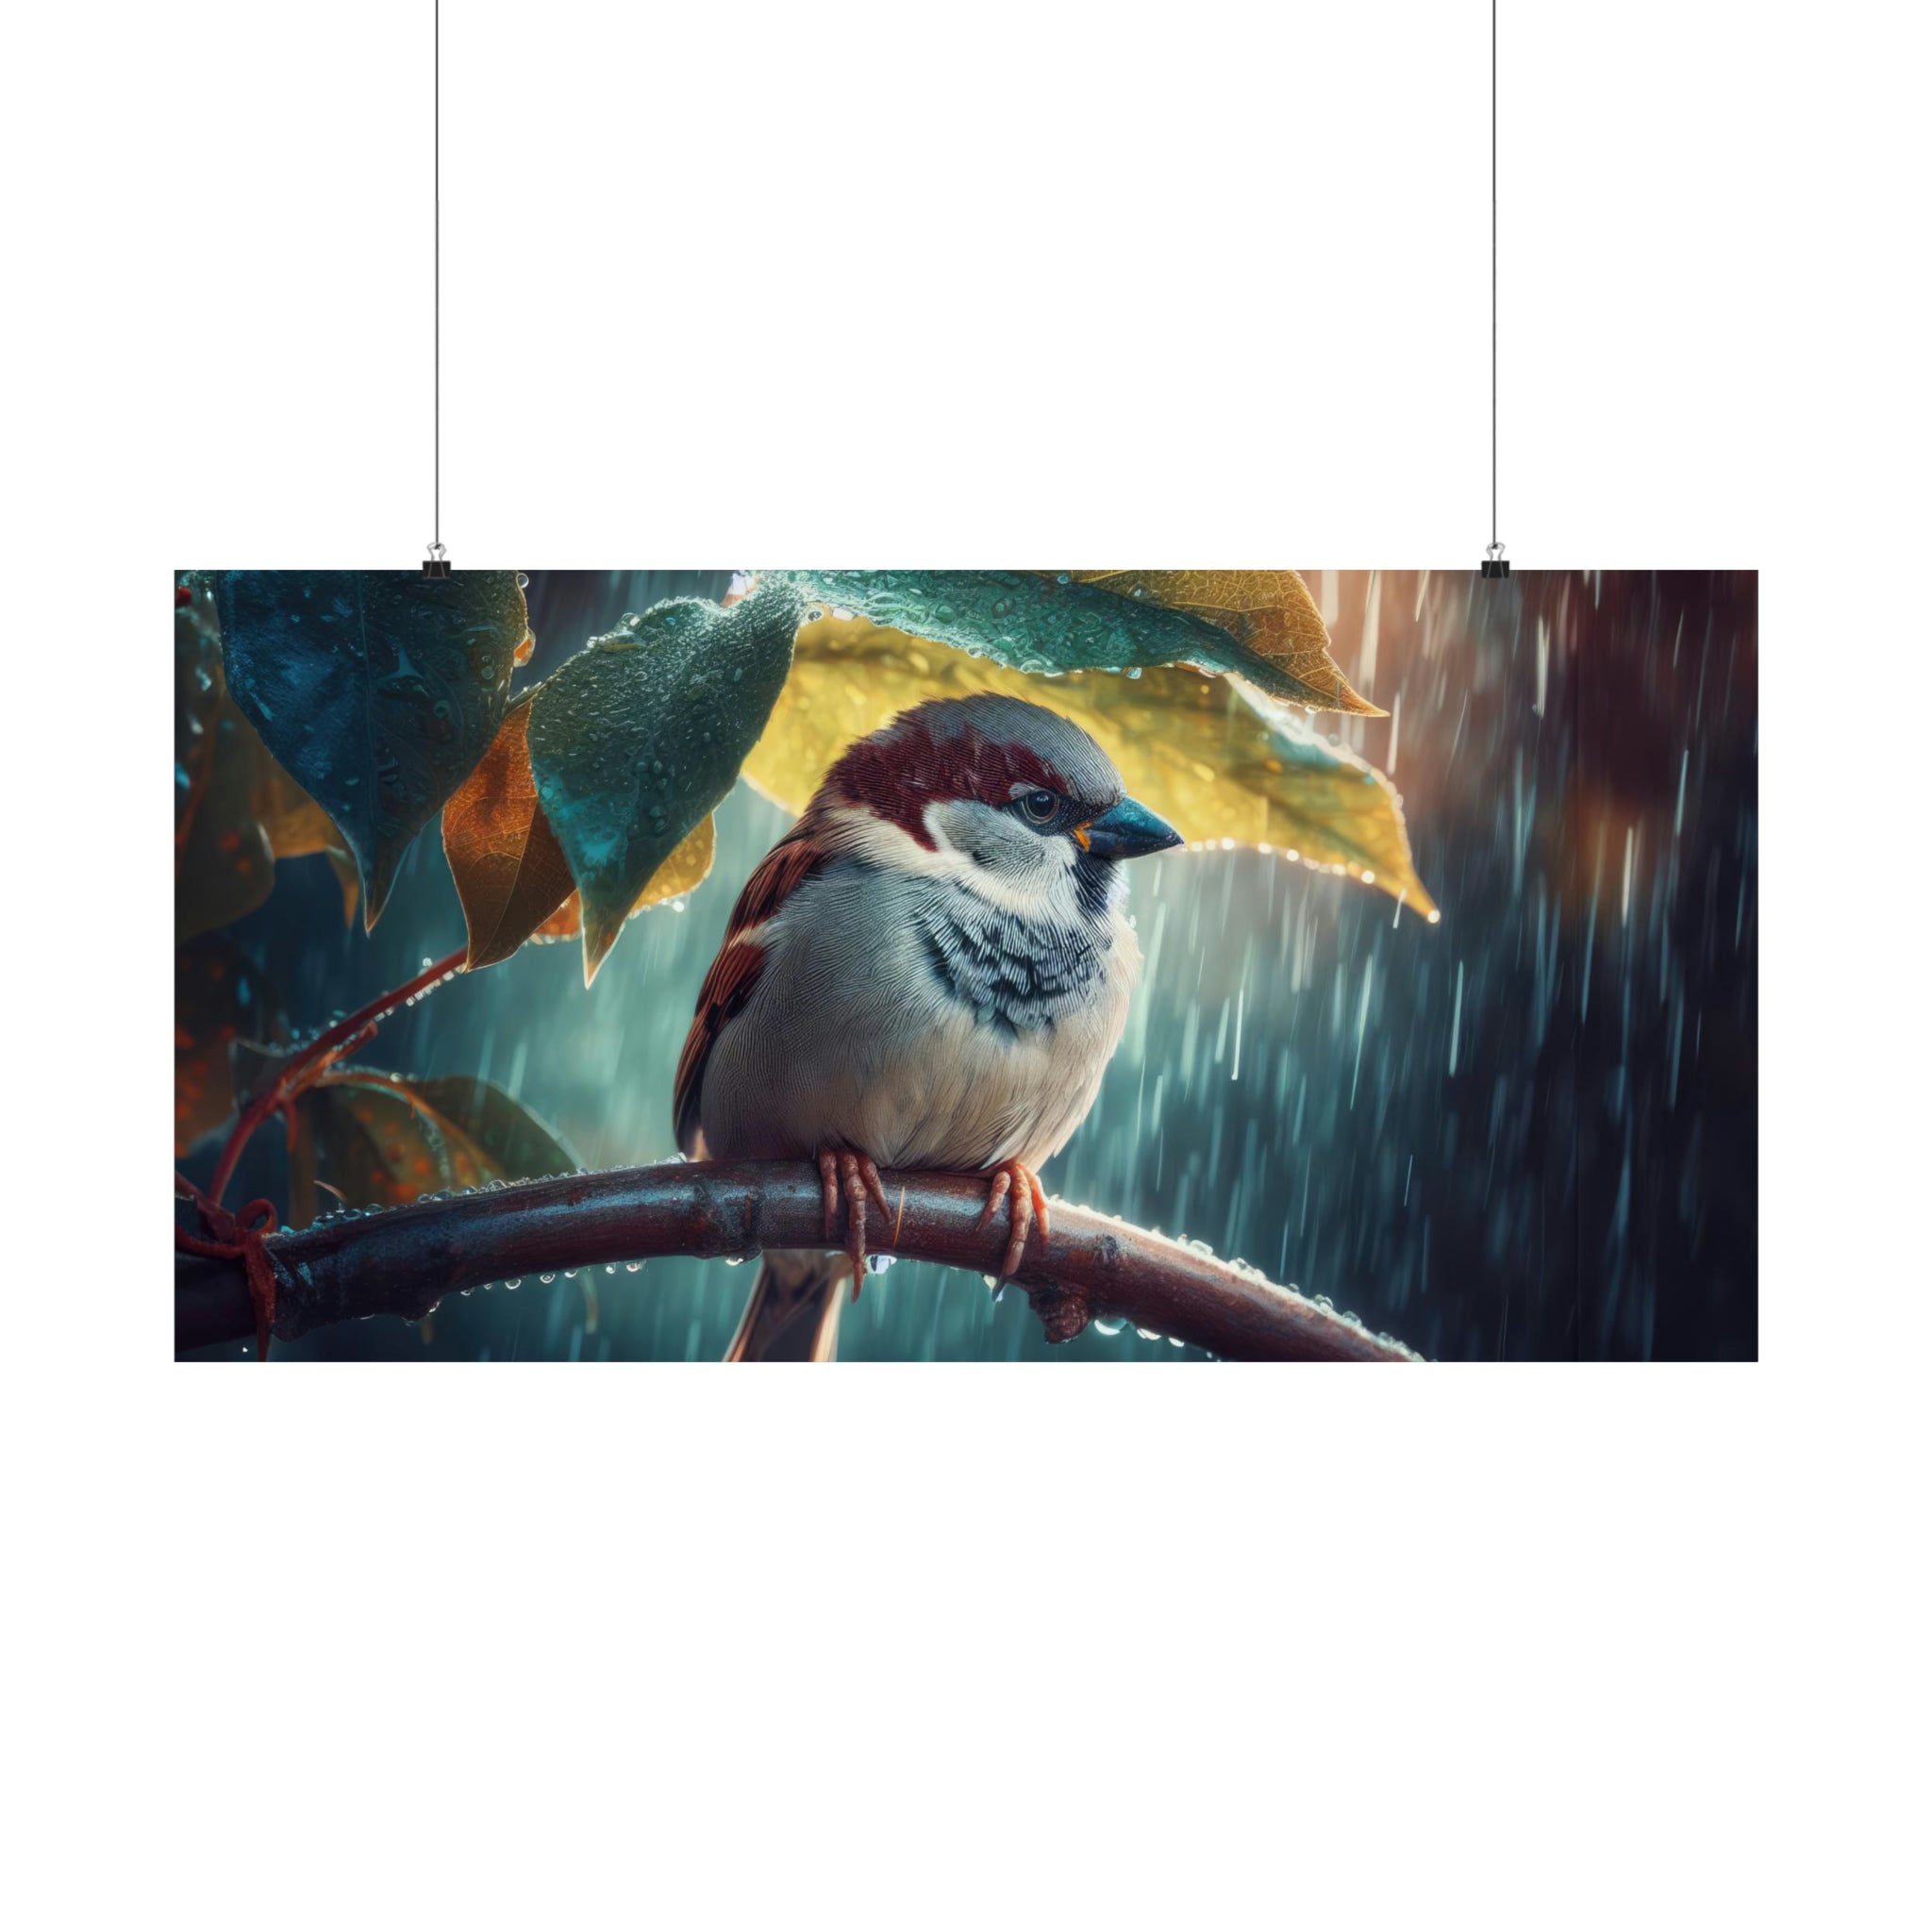 Sparrow's Leafy Sanctuary in the Rainy Chill Poster